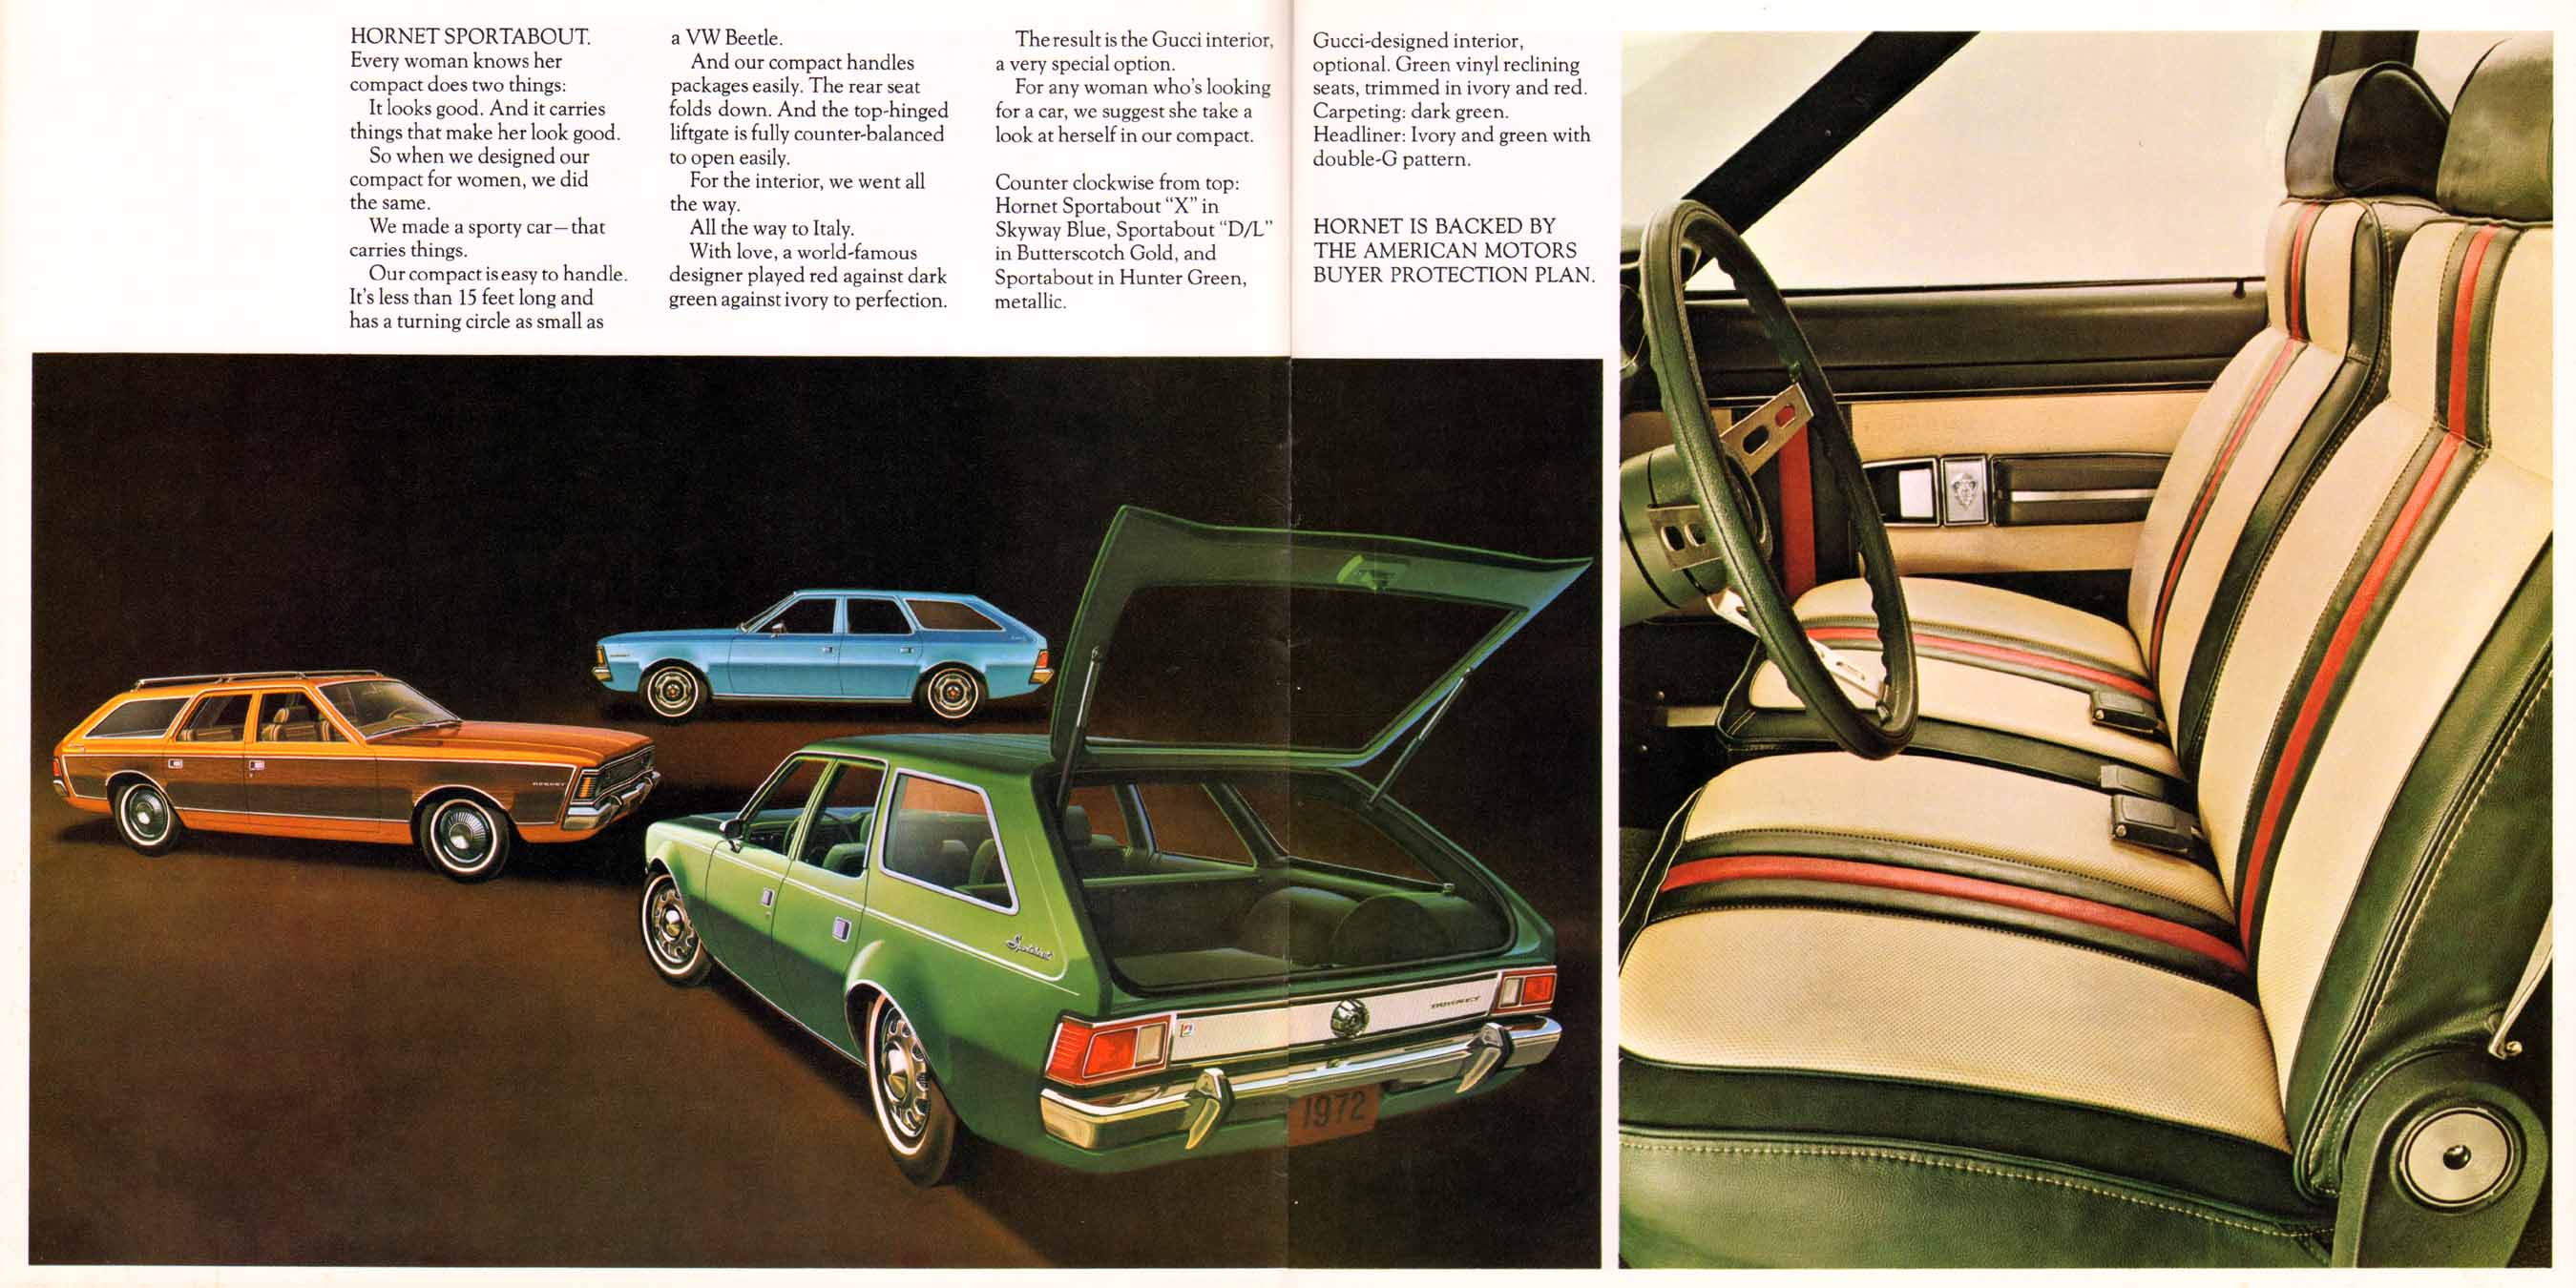 1972 AMC Full Line Brochure page 7 of 17.